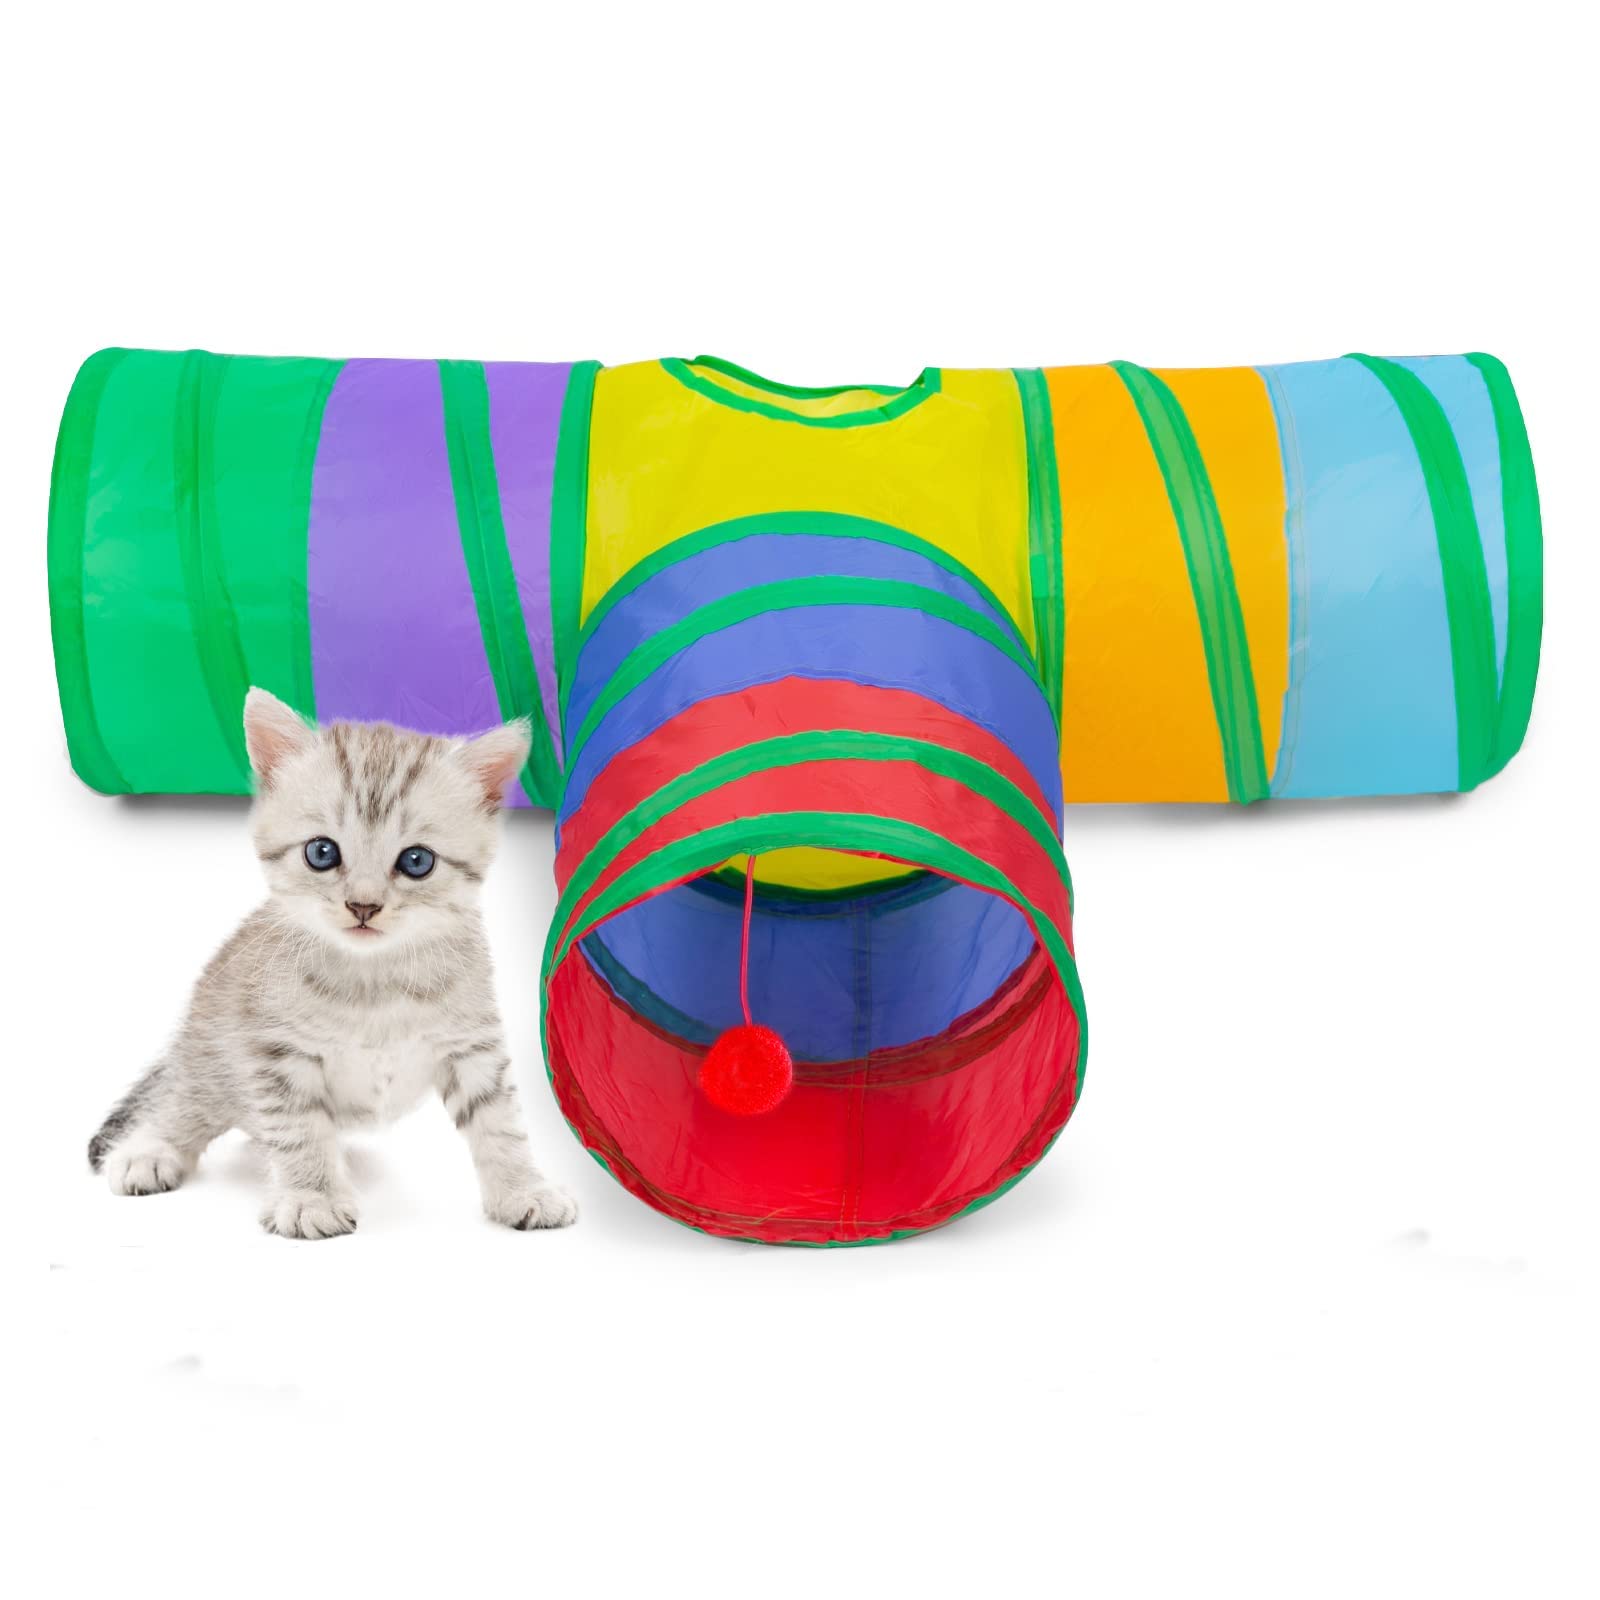 Alicedreamsky cat Tunnel, collapsible Tube with 1 Play Ball Kitty Toys, 3 Ways cat Tunnels for Indoor cats, Puppy, Kitty, Kitten